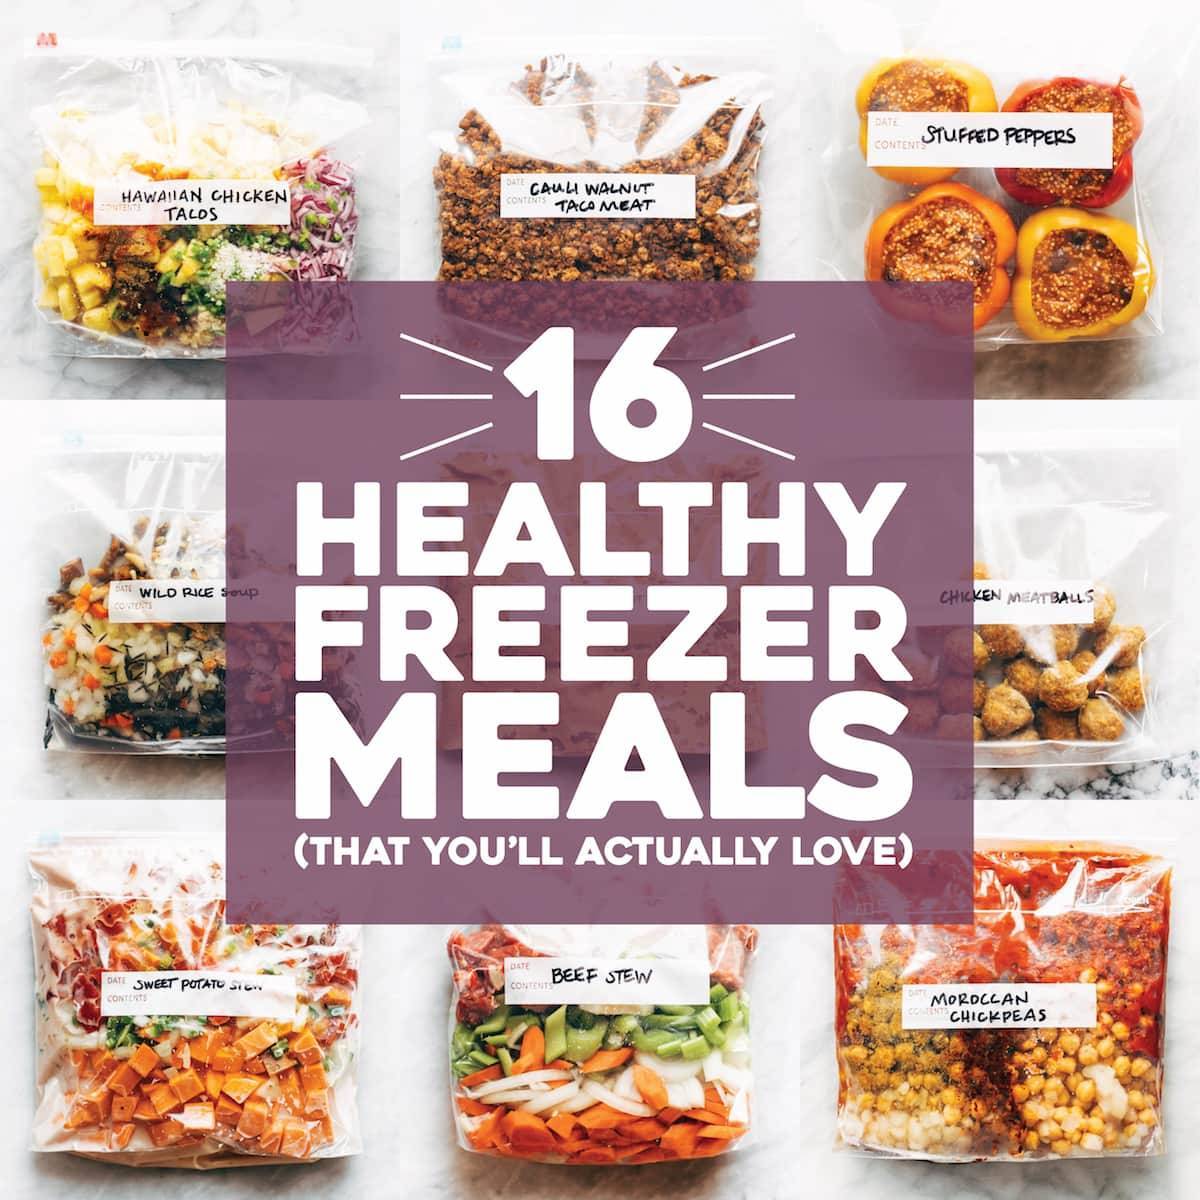 16 Healthy Freezer Meals (That You'll Actually Love) - Pinch of Yum